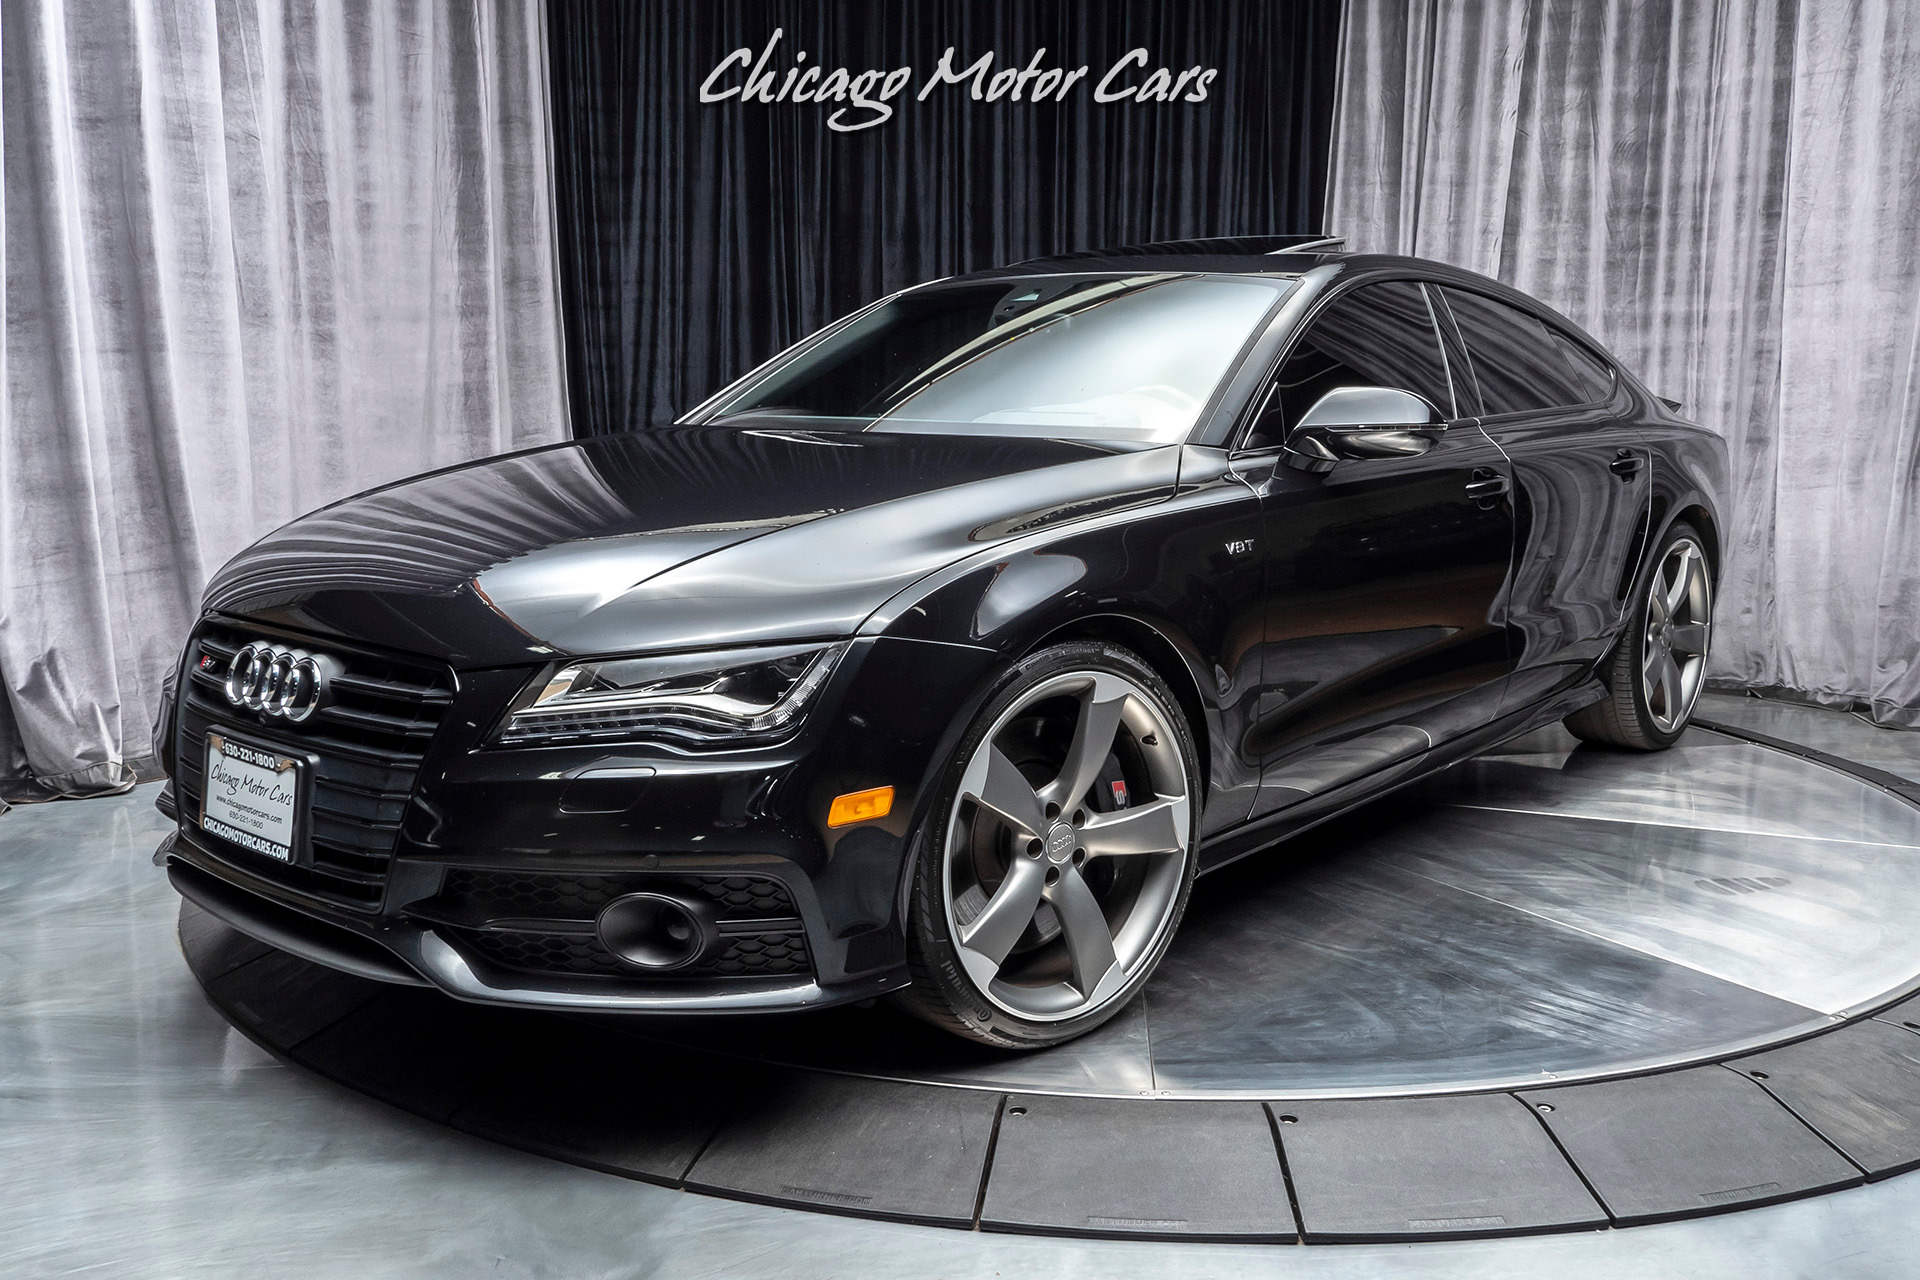 Used 2015 Audi S7 4.0T quattro S tronic Hatchback MSRP $100,190 For Sale  (Special Pricing) | Chicago Motor Cars Stock #16199